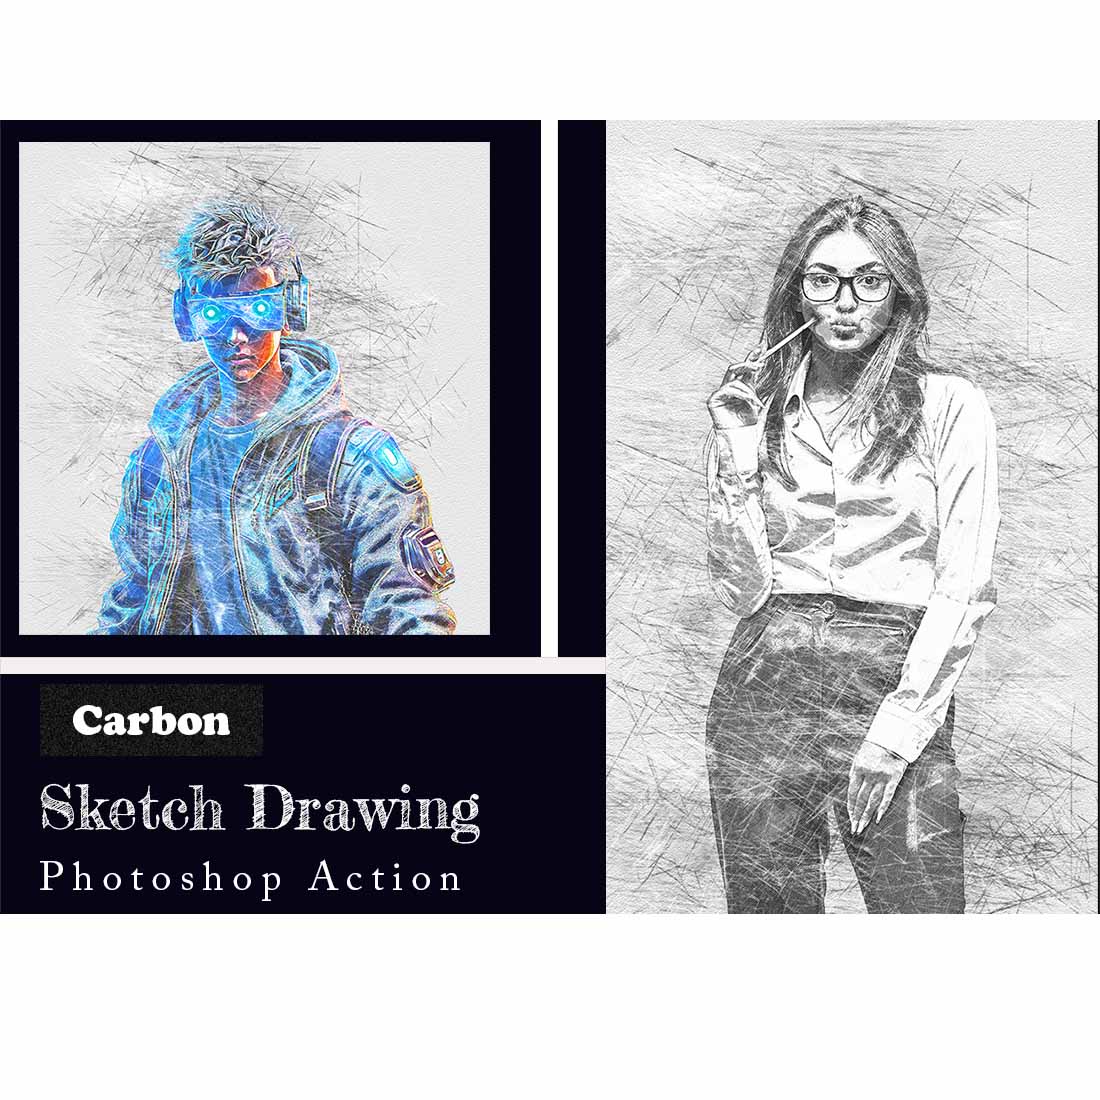 Carbon Sketch Drawing Photoshop Action cover image.